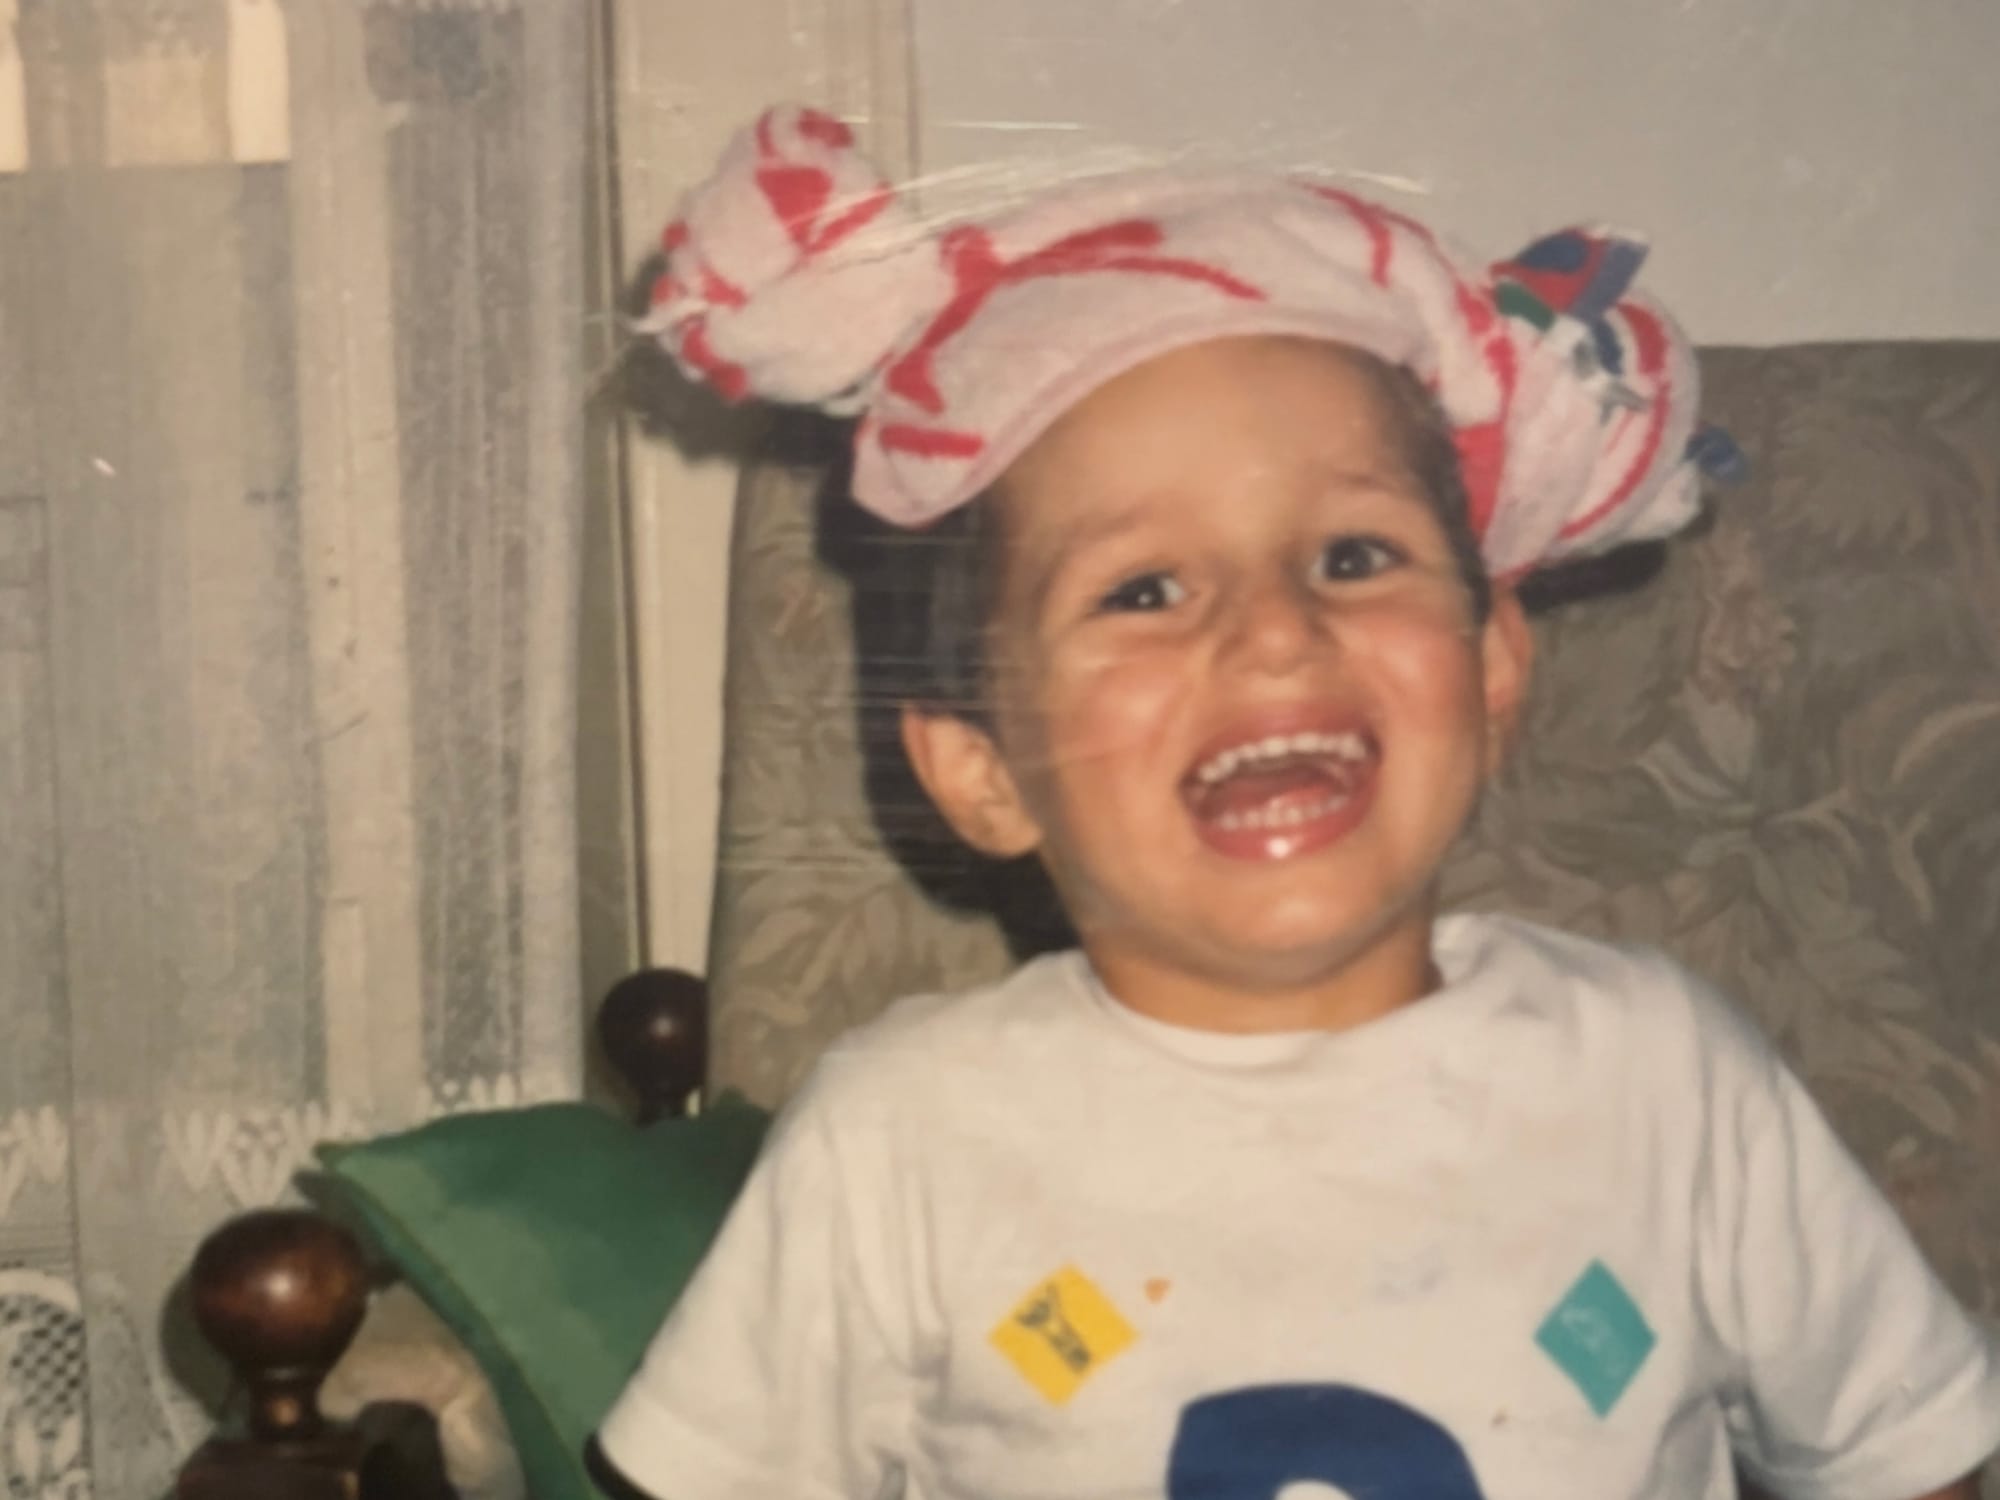 A picture of me smiling when I was a kid with a towel on my head like a turban